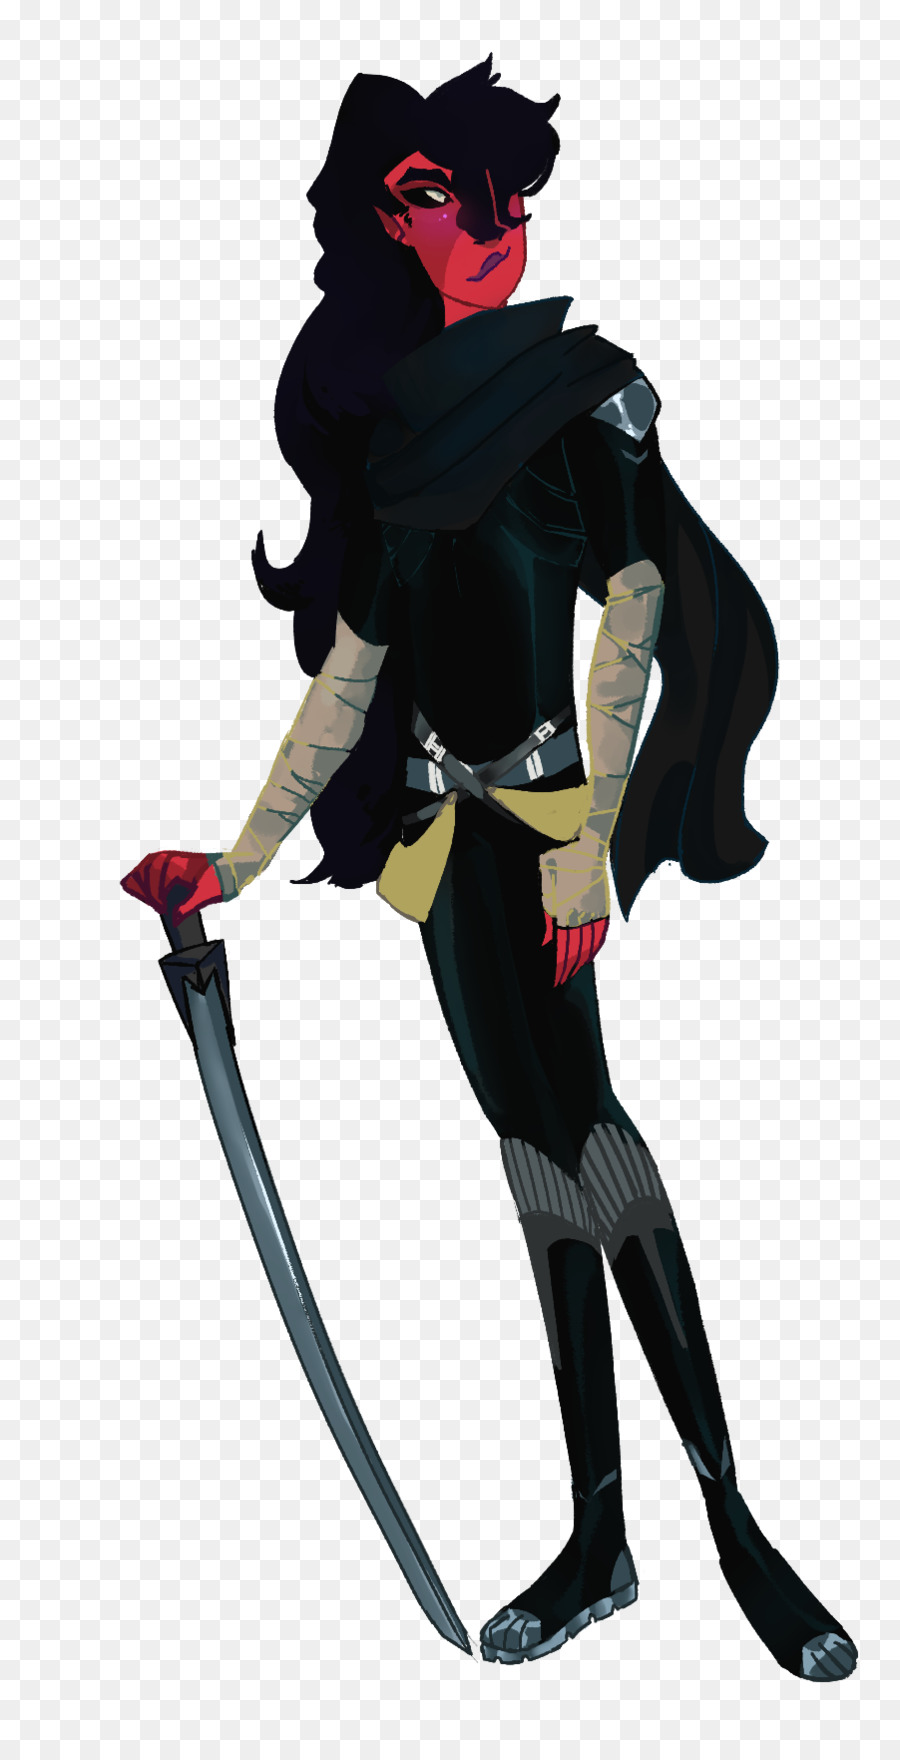 Costume，Caractère PNG